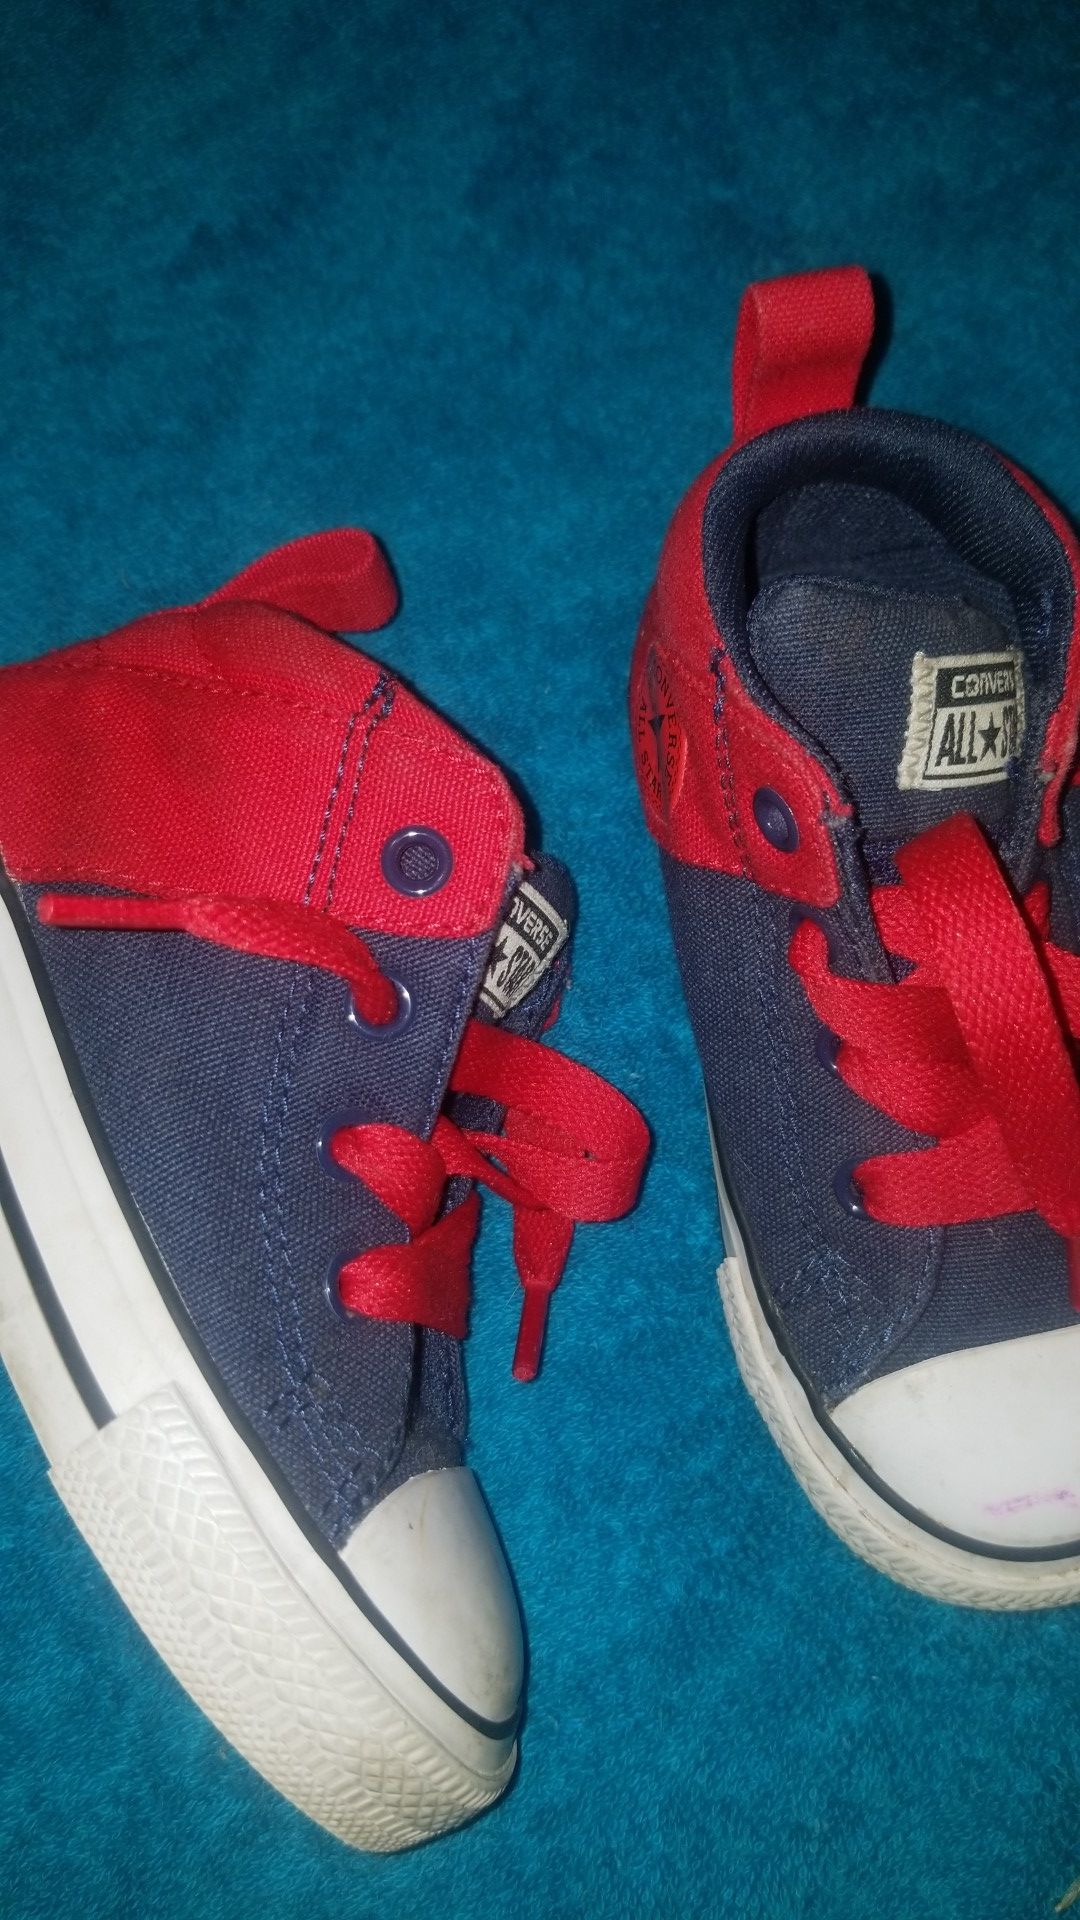 Baby converse shoes size 7